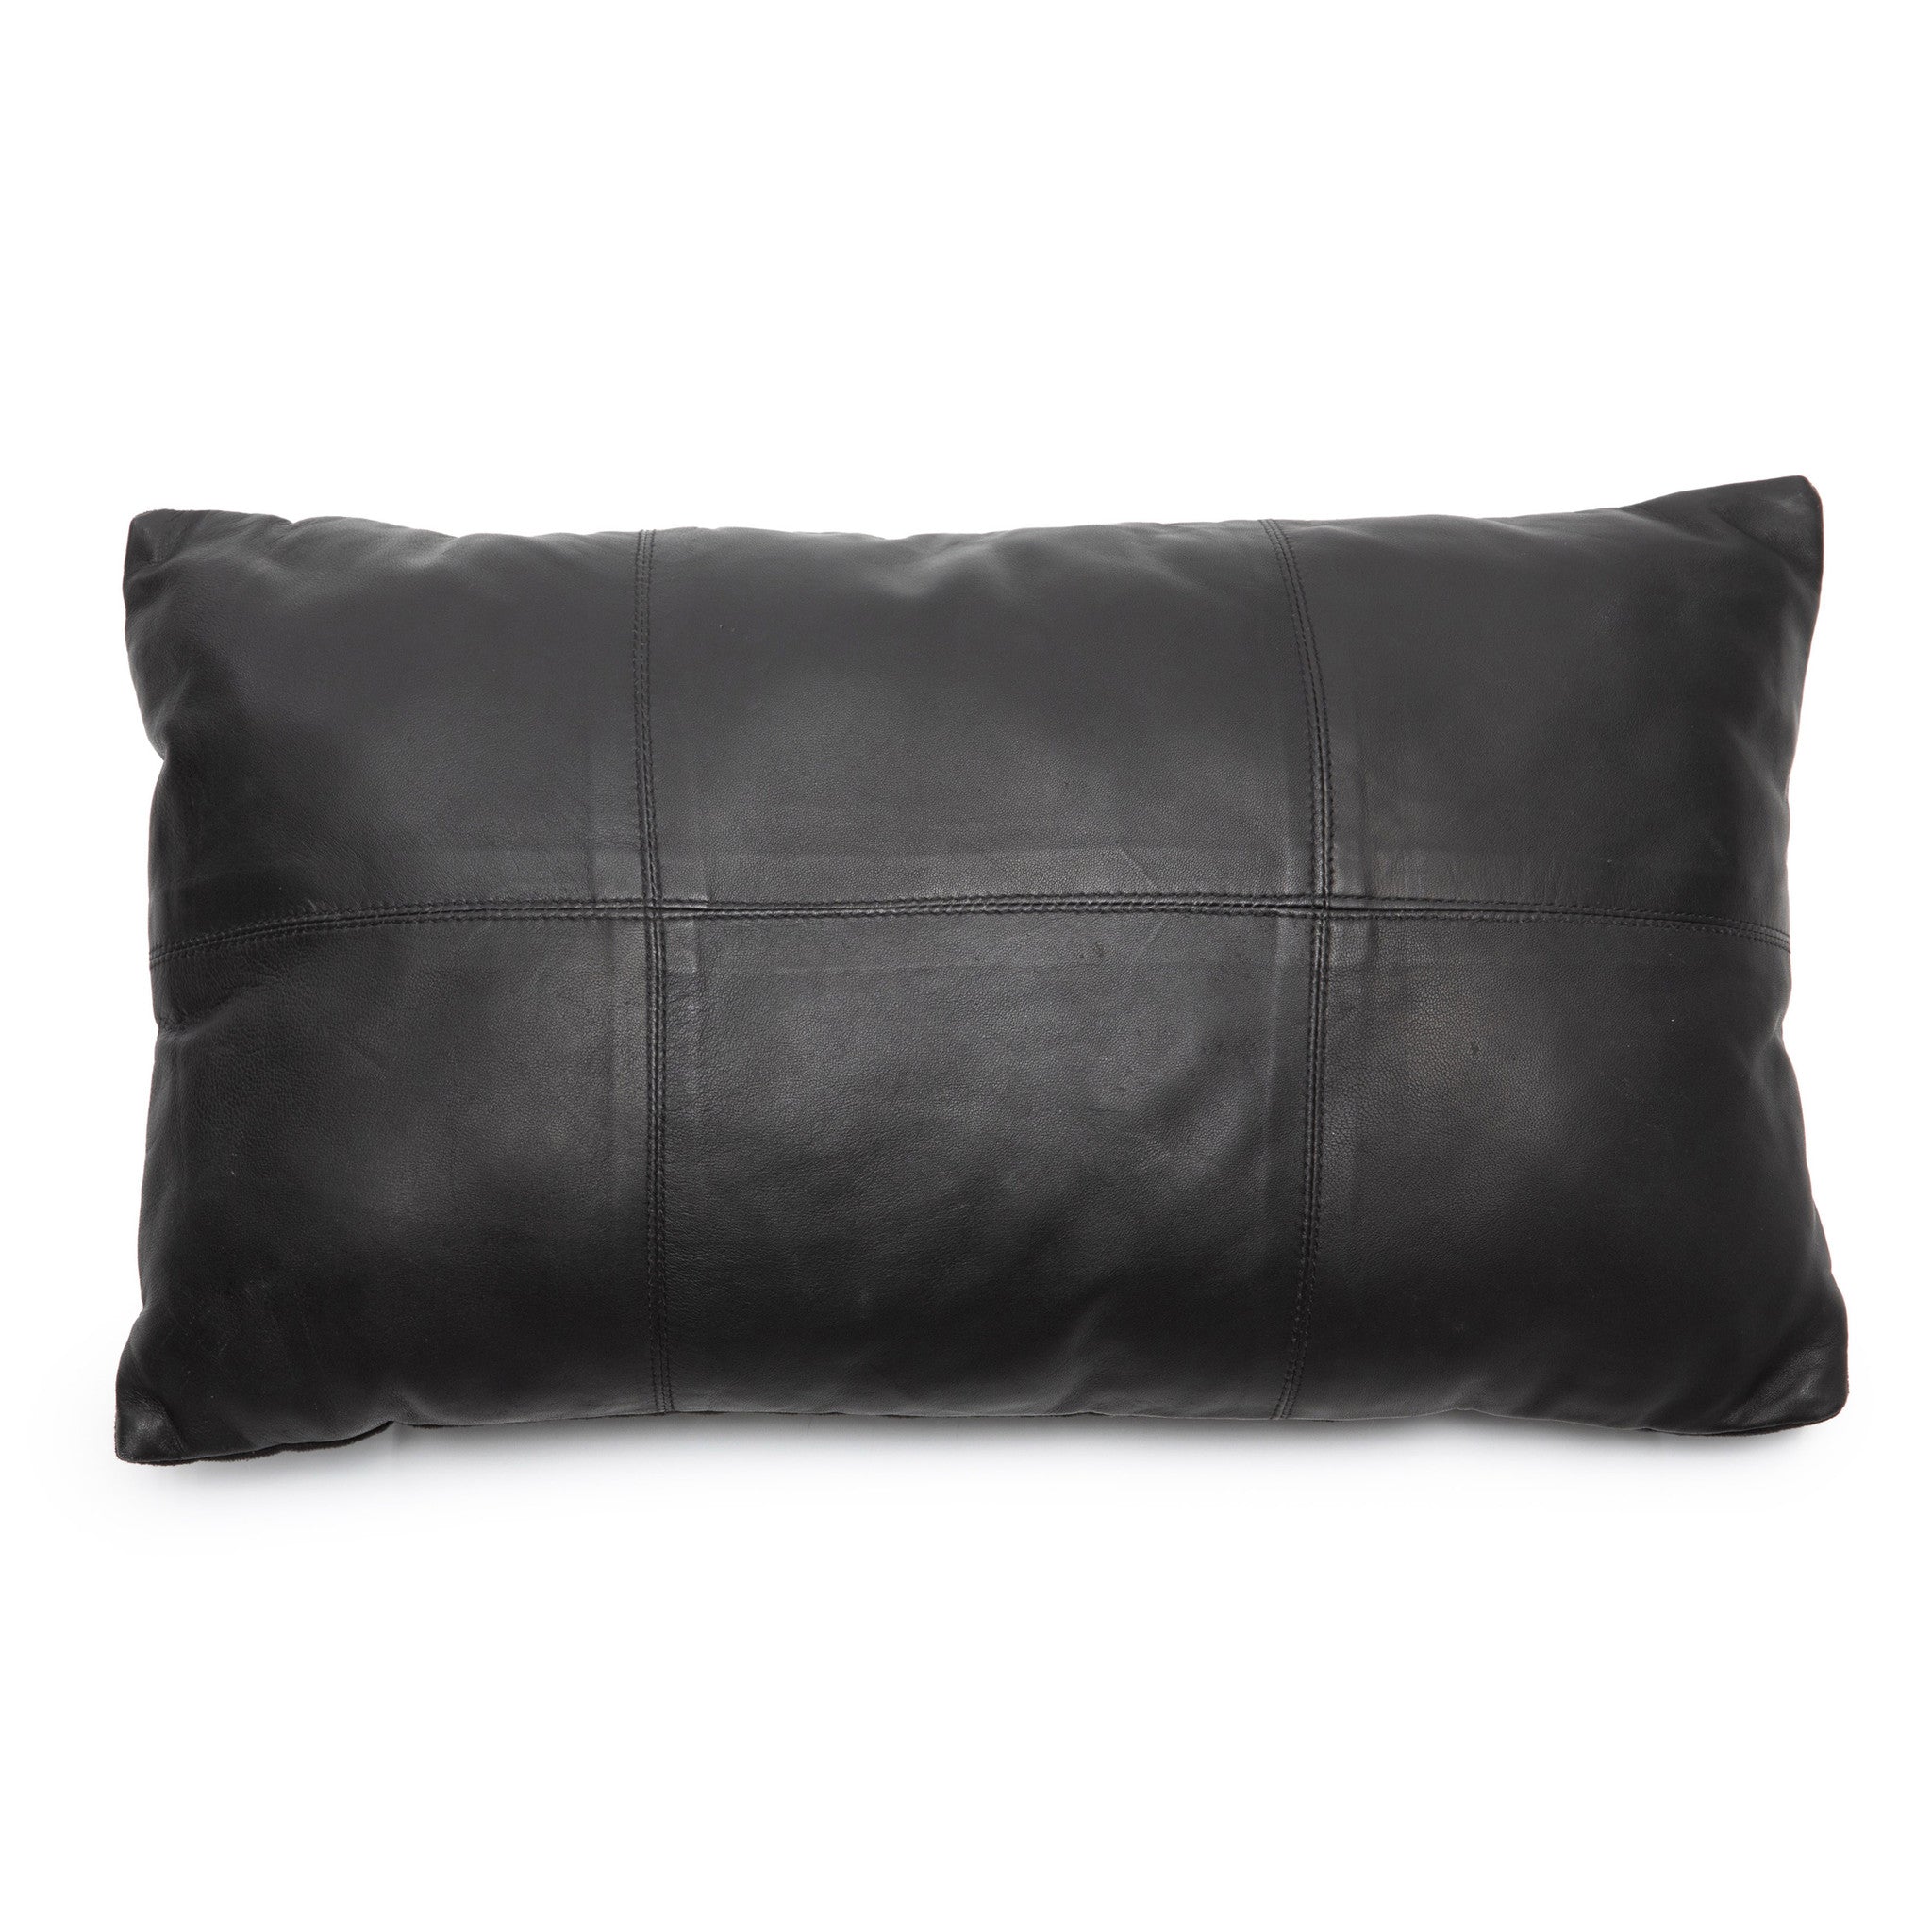 THE SIX PANEL Leather Cushion Cover Black 30x50 front view